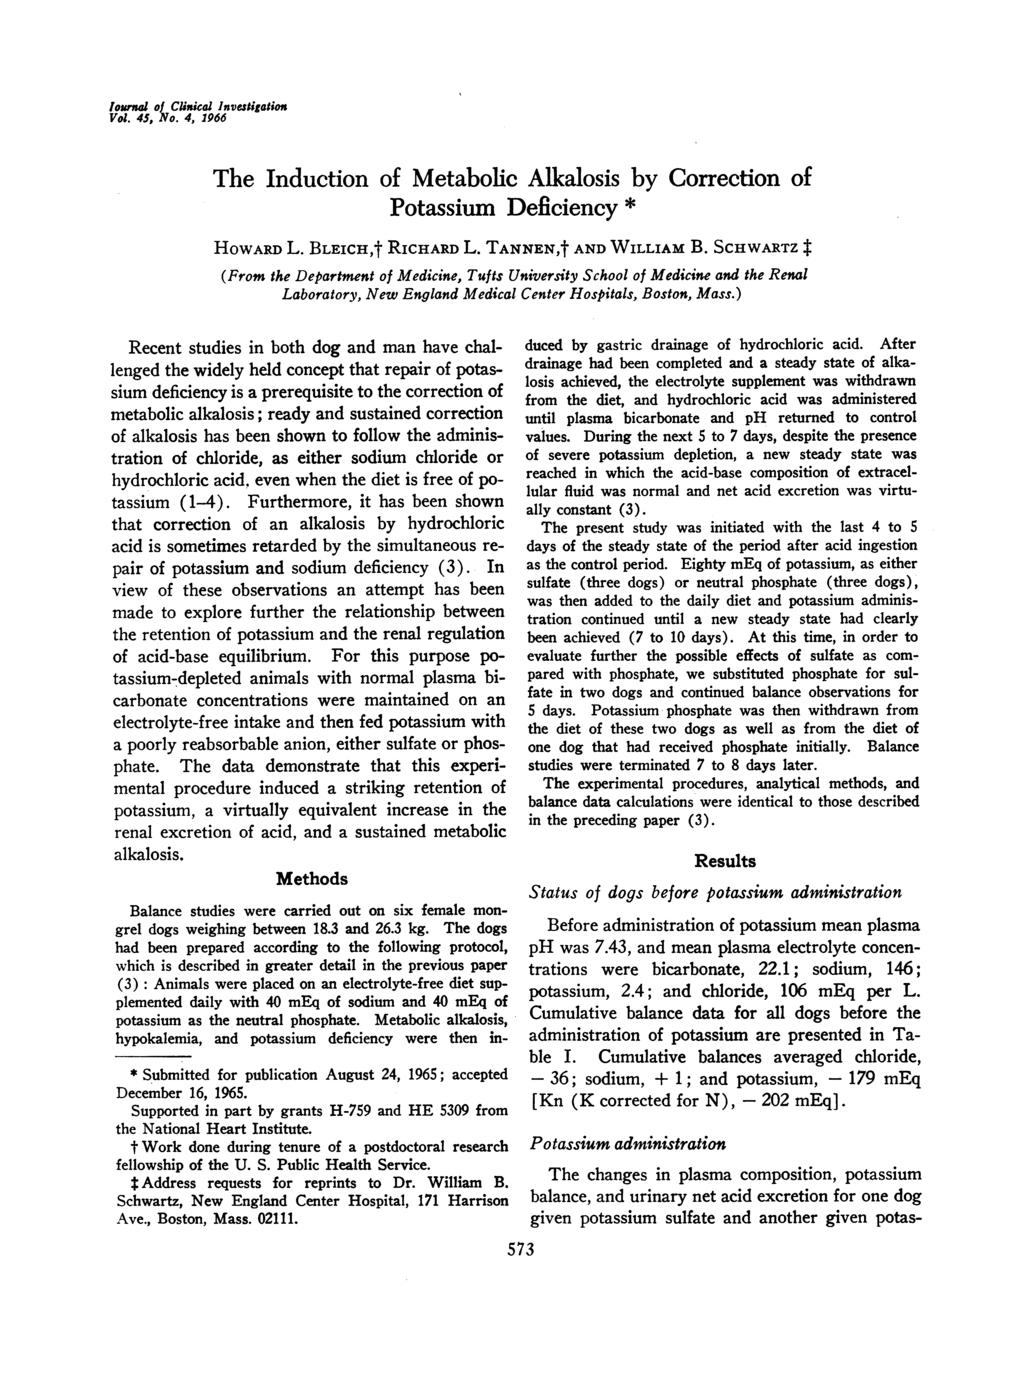 lournal of Clinical Investigation Vol. 45, No. 4, 1966 The Induction of Metabolic Alkalosis by Correction of Potassium Deficiency * HOWARD L. BLEICH,t RICHARD L. TANNEN,t AND WILLIAM B.